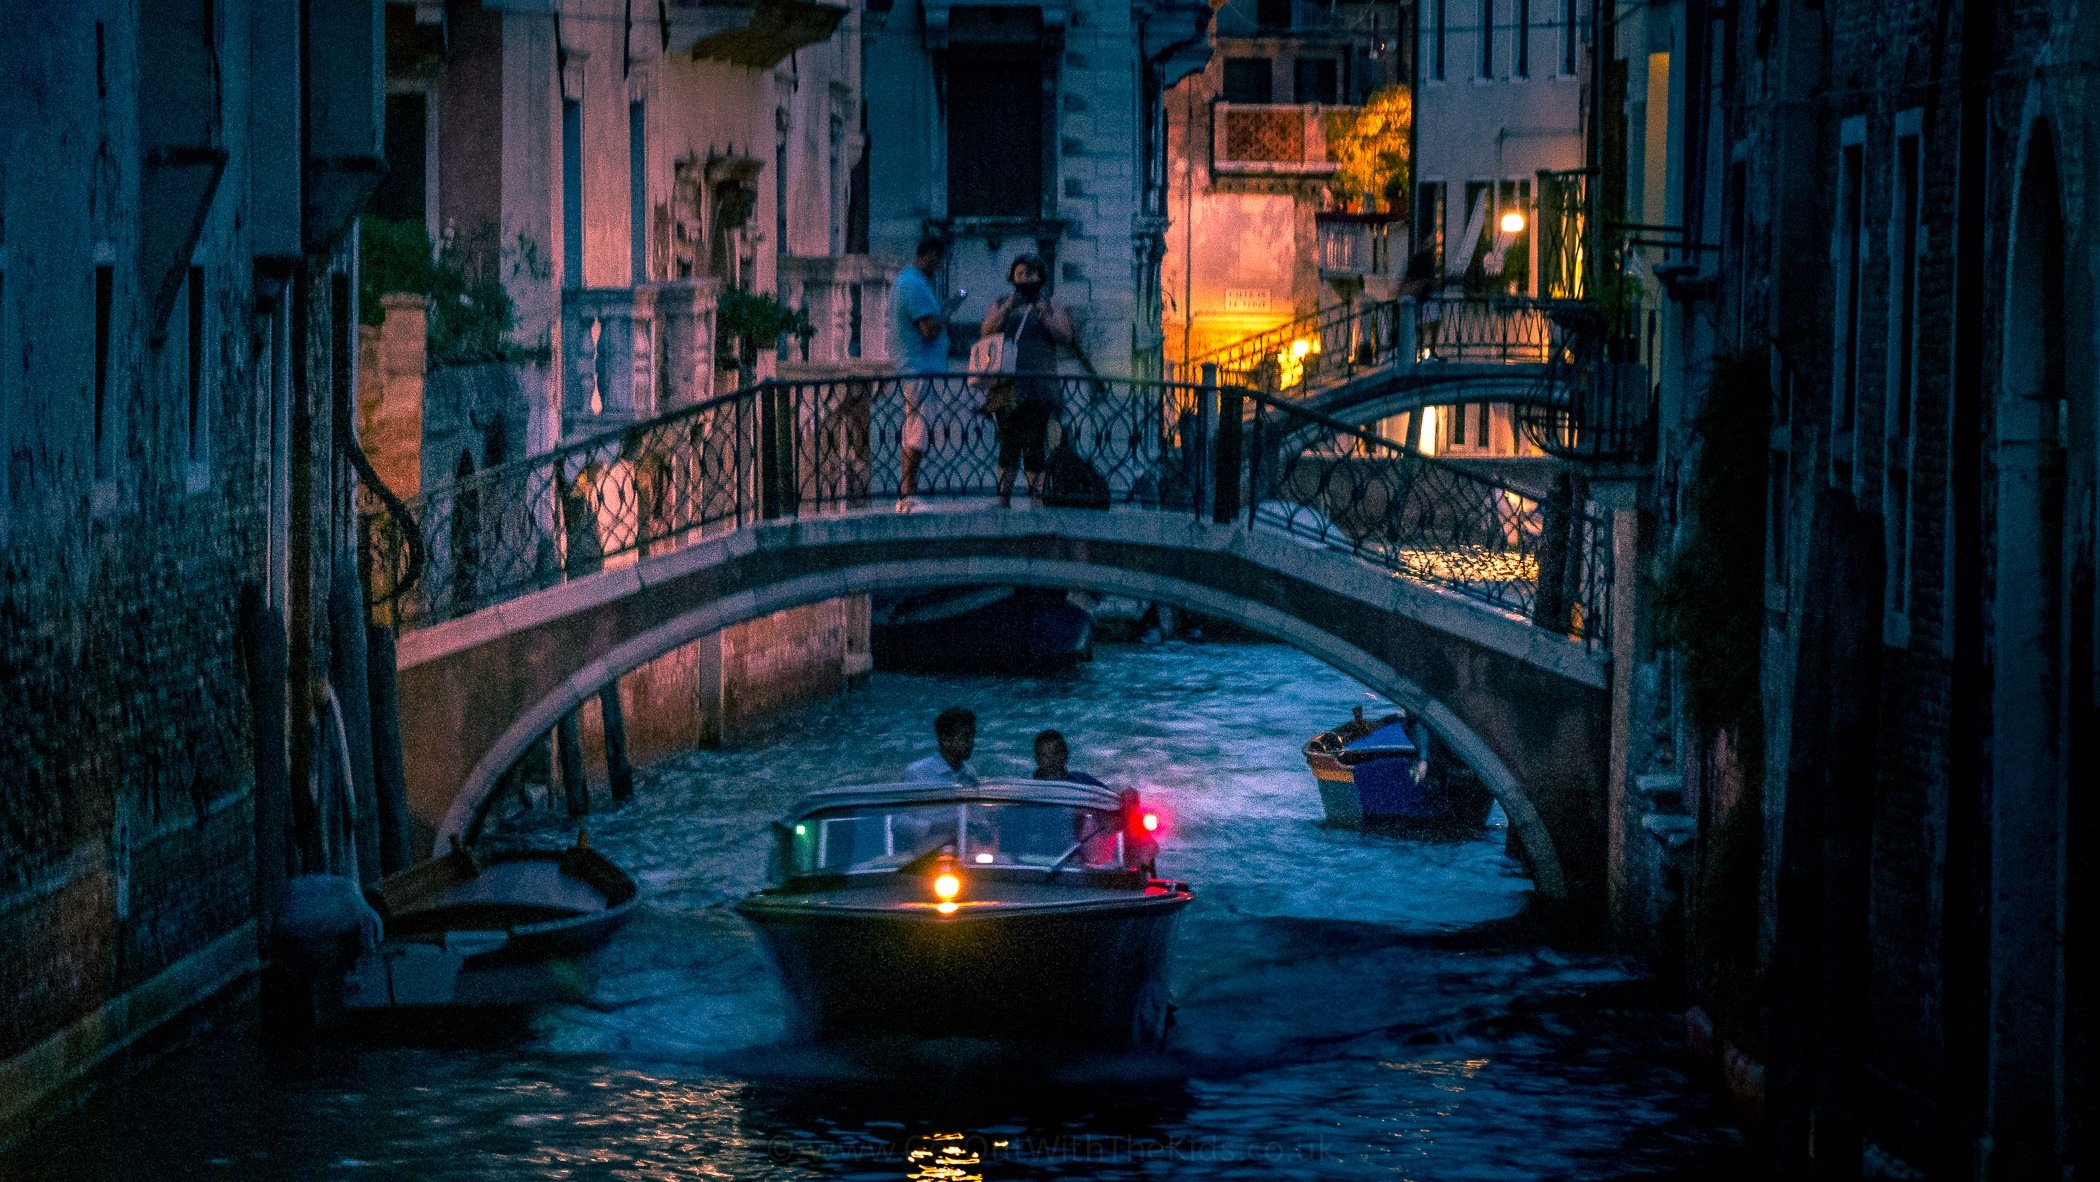 Boats on the canal in the evening